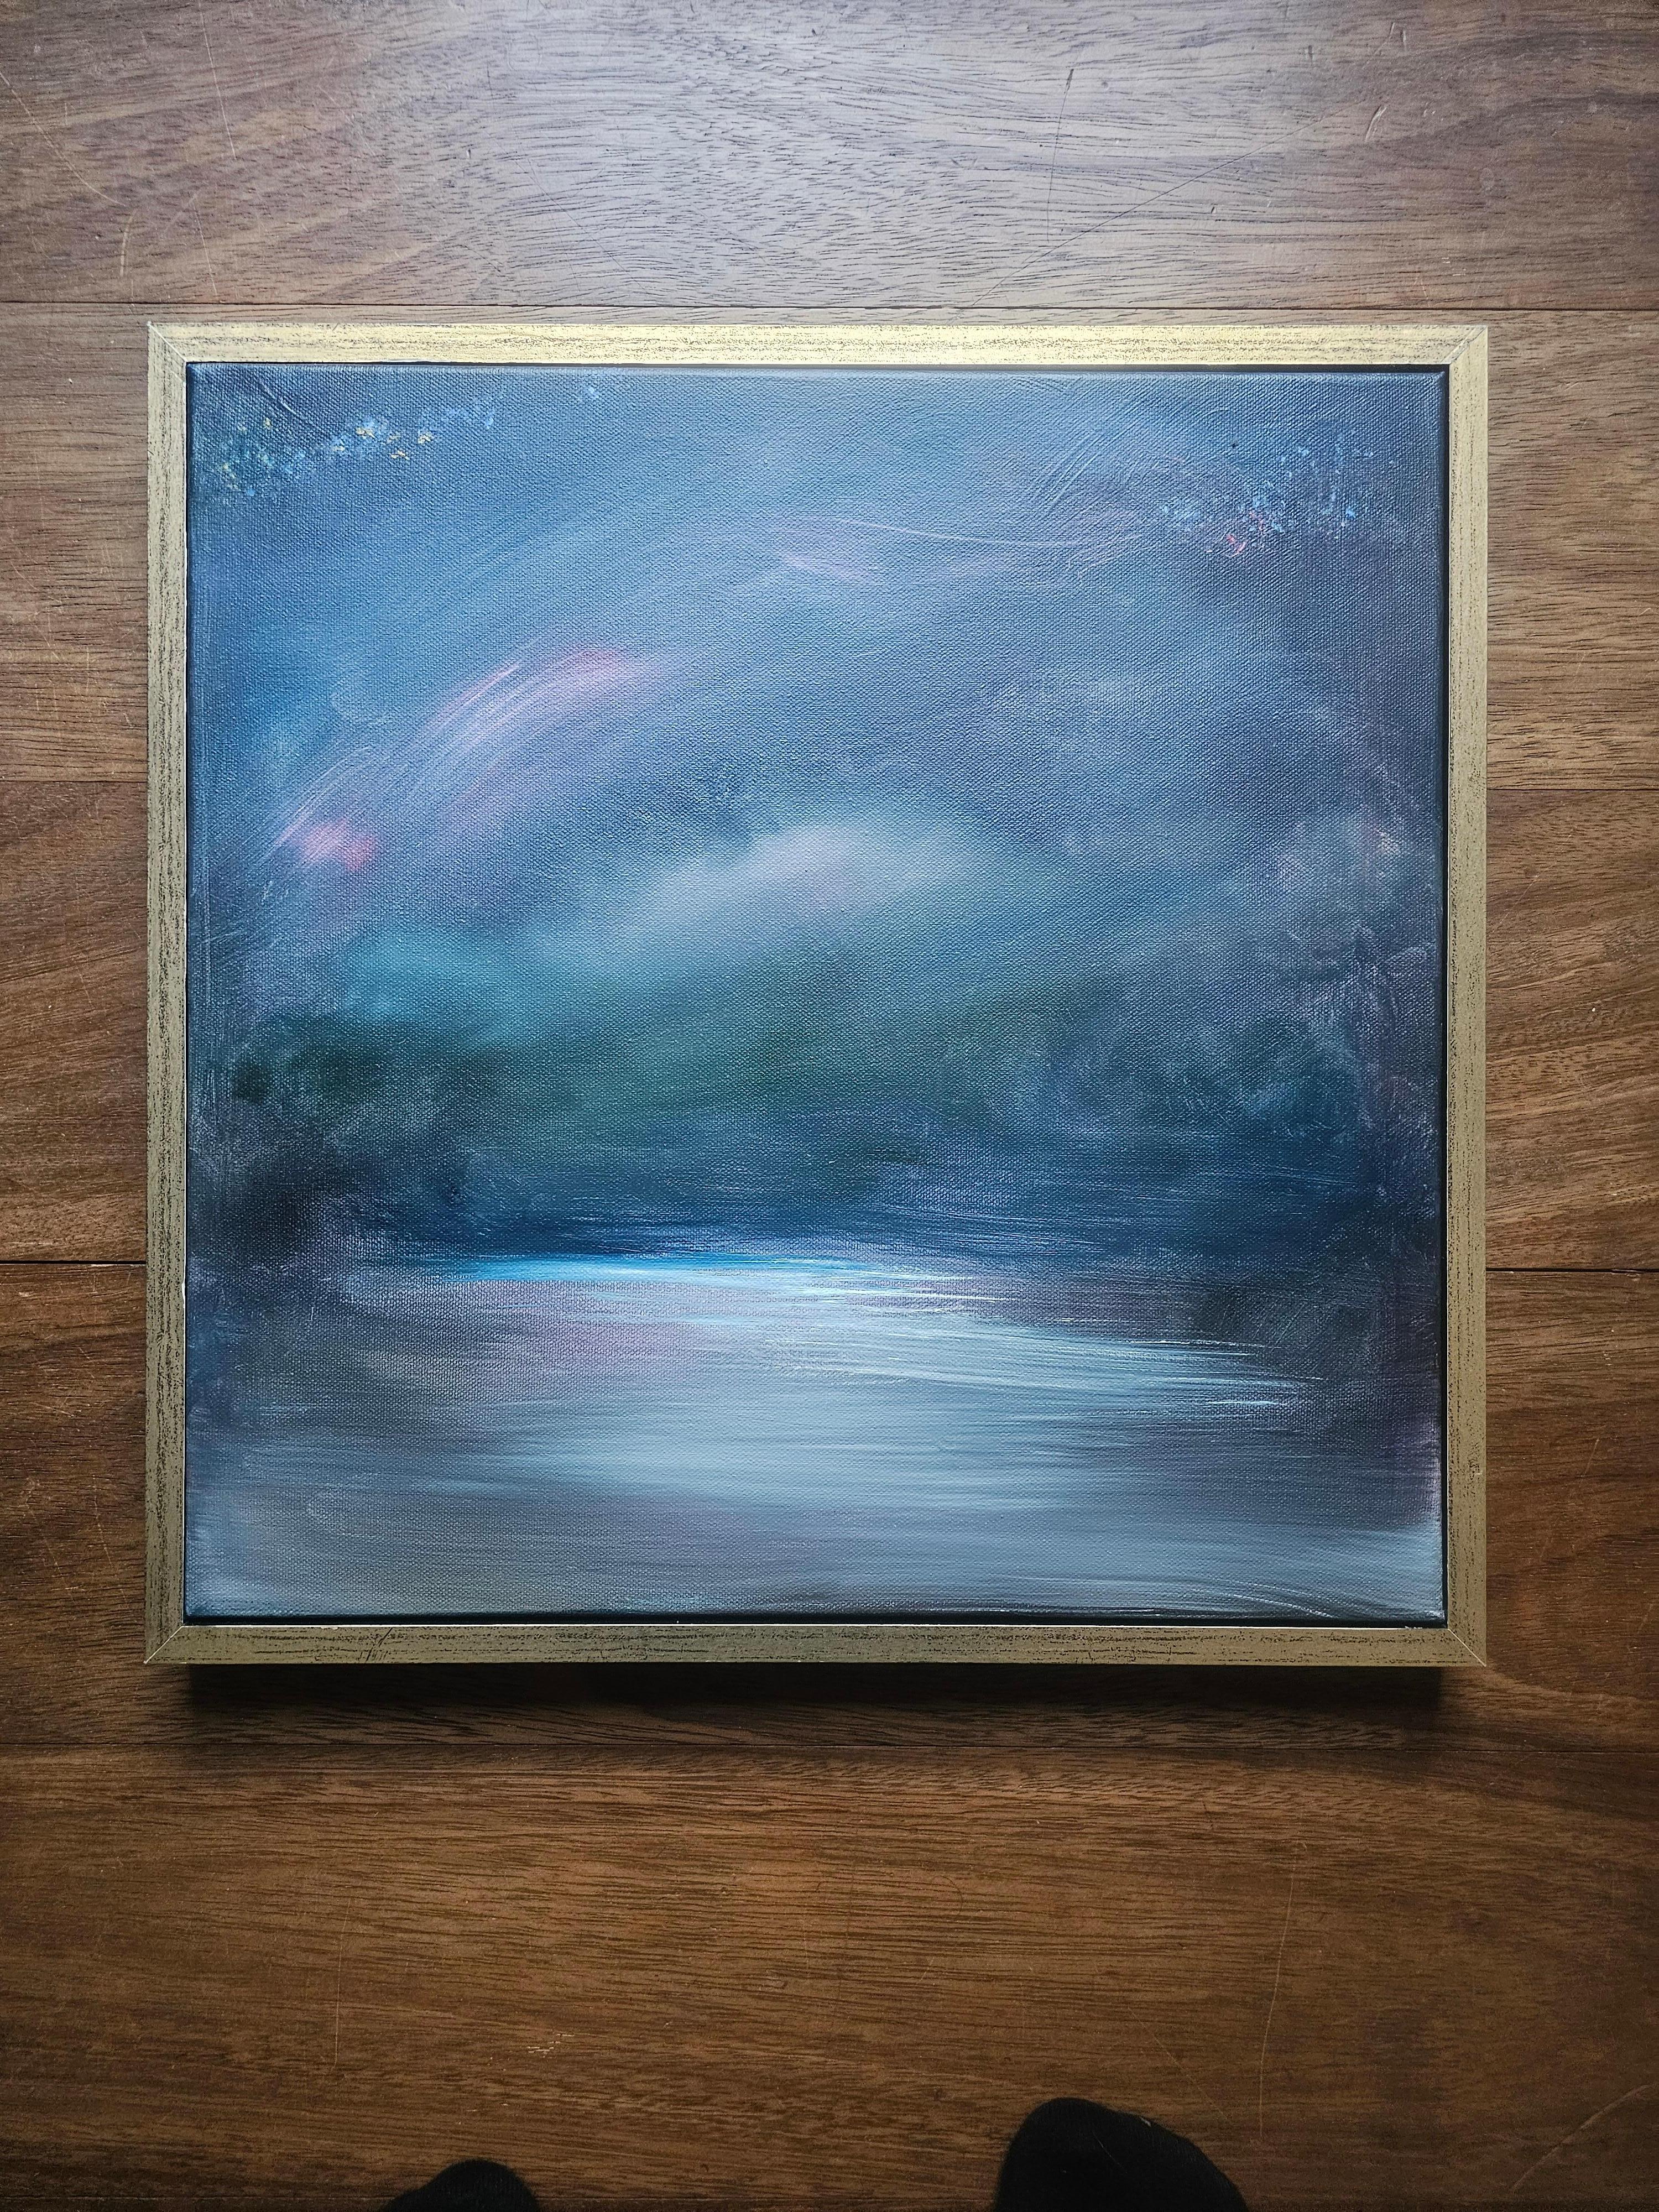 The long walk home - Framed abstract night sky seascape painting - Abstract Impressionist Painting by Jennifer L. Baker